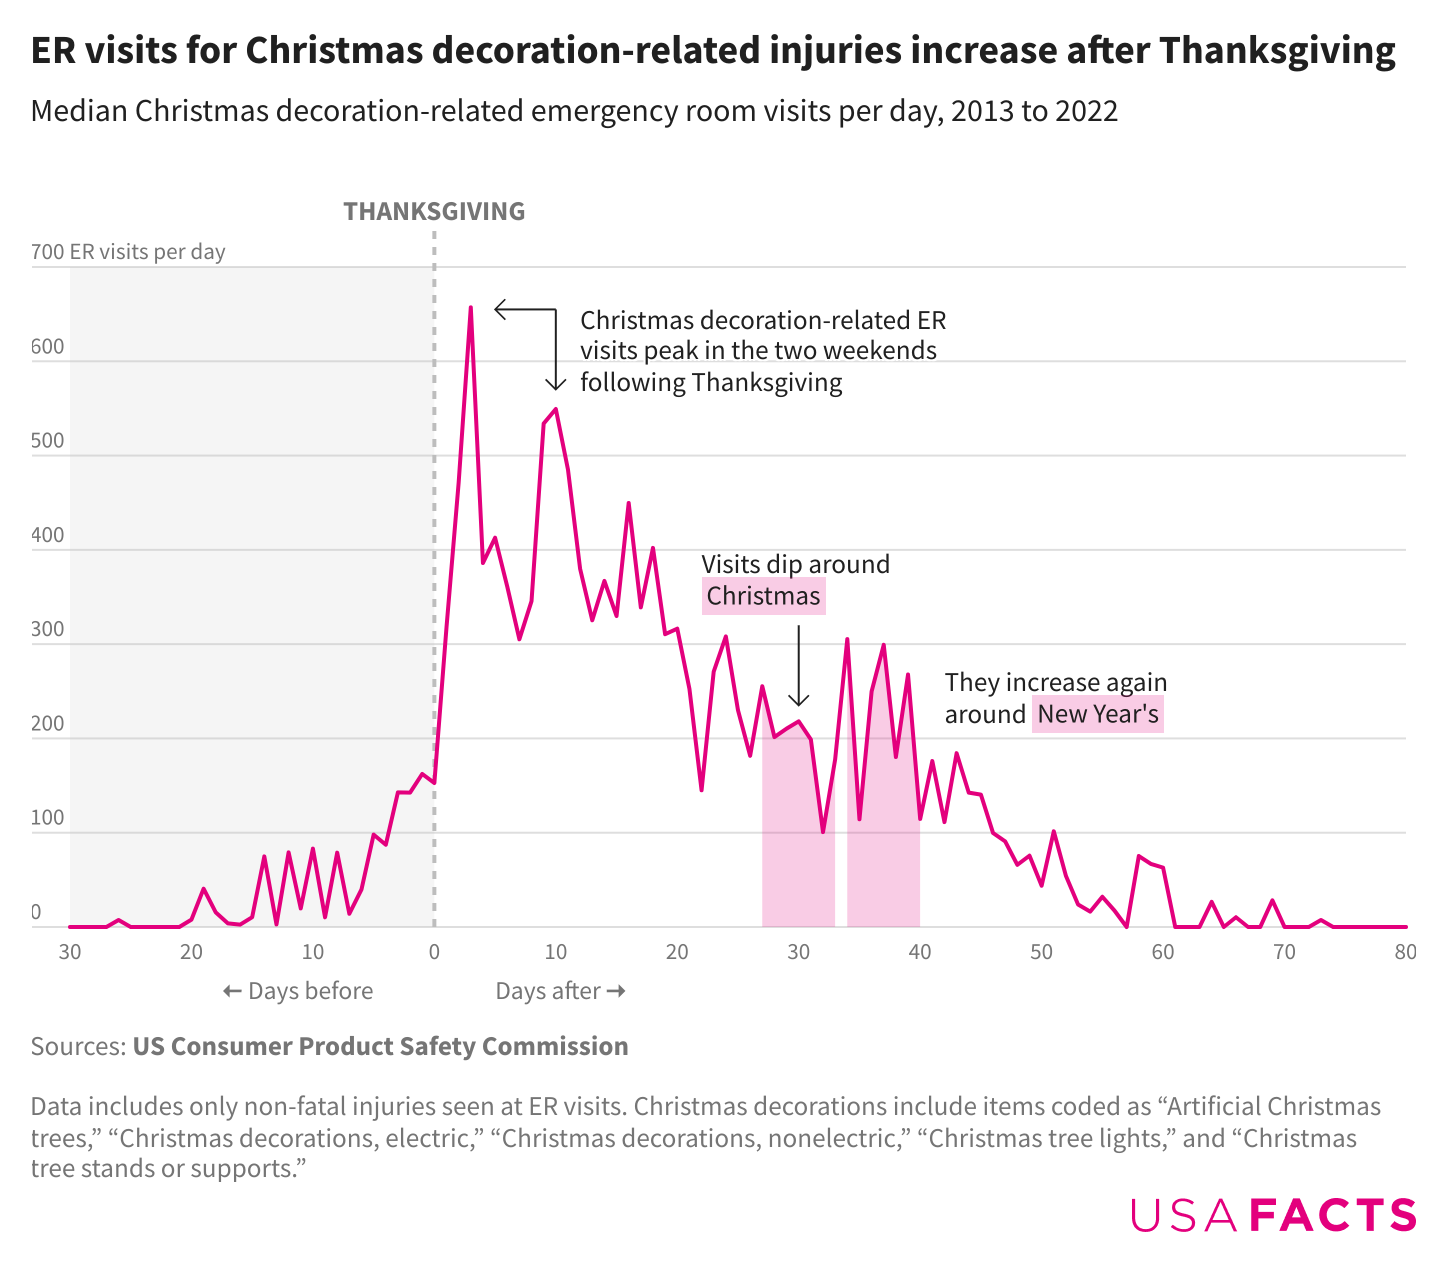 A line chart showing the number of ER visits related to Christmas decorations per day in the weeks before and after Thanksgiving. The largest spike is during the two weekends immediately following Thanksgiving. Visits dip in the days around Christmas but rise again in the days around New Year’s.